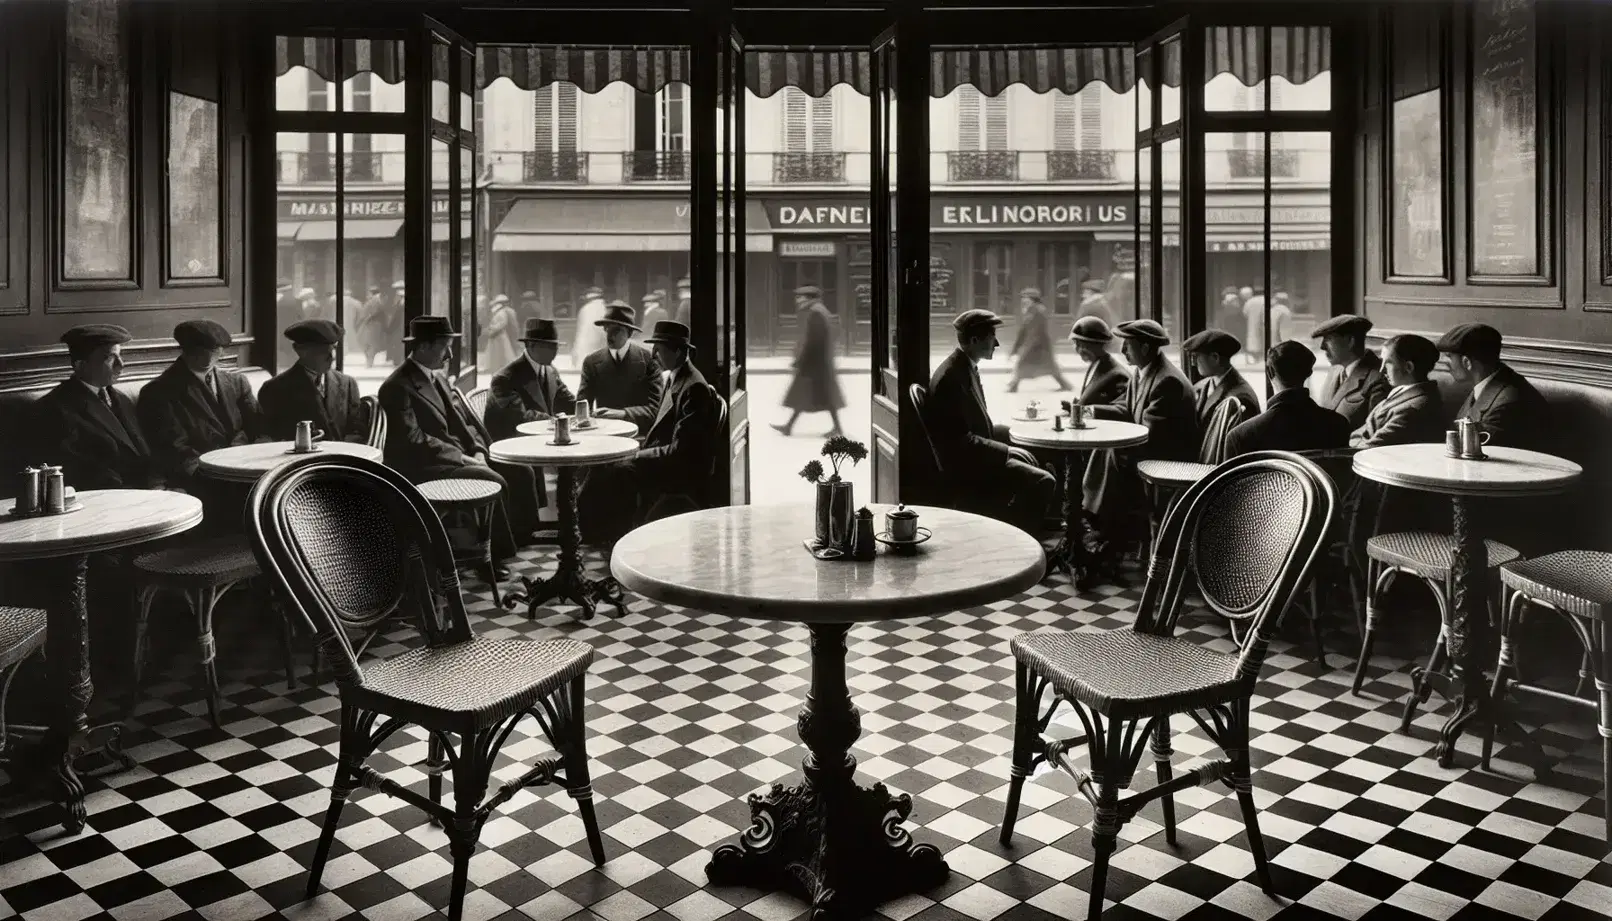 Vintage Parisian café scene with marble-topped table, rattan chairs, checkerboard floor, and patrons in mid-20th-century attire, reflecting a relaxed social setting.